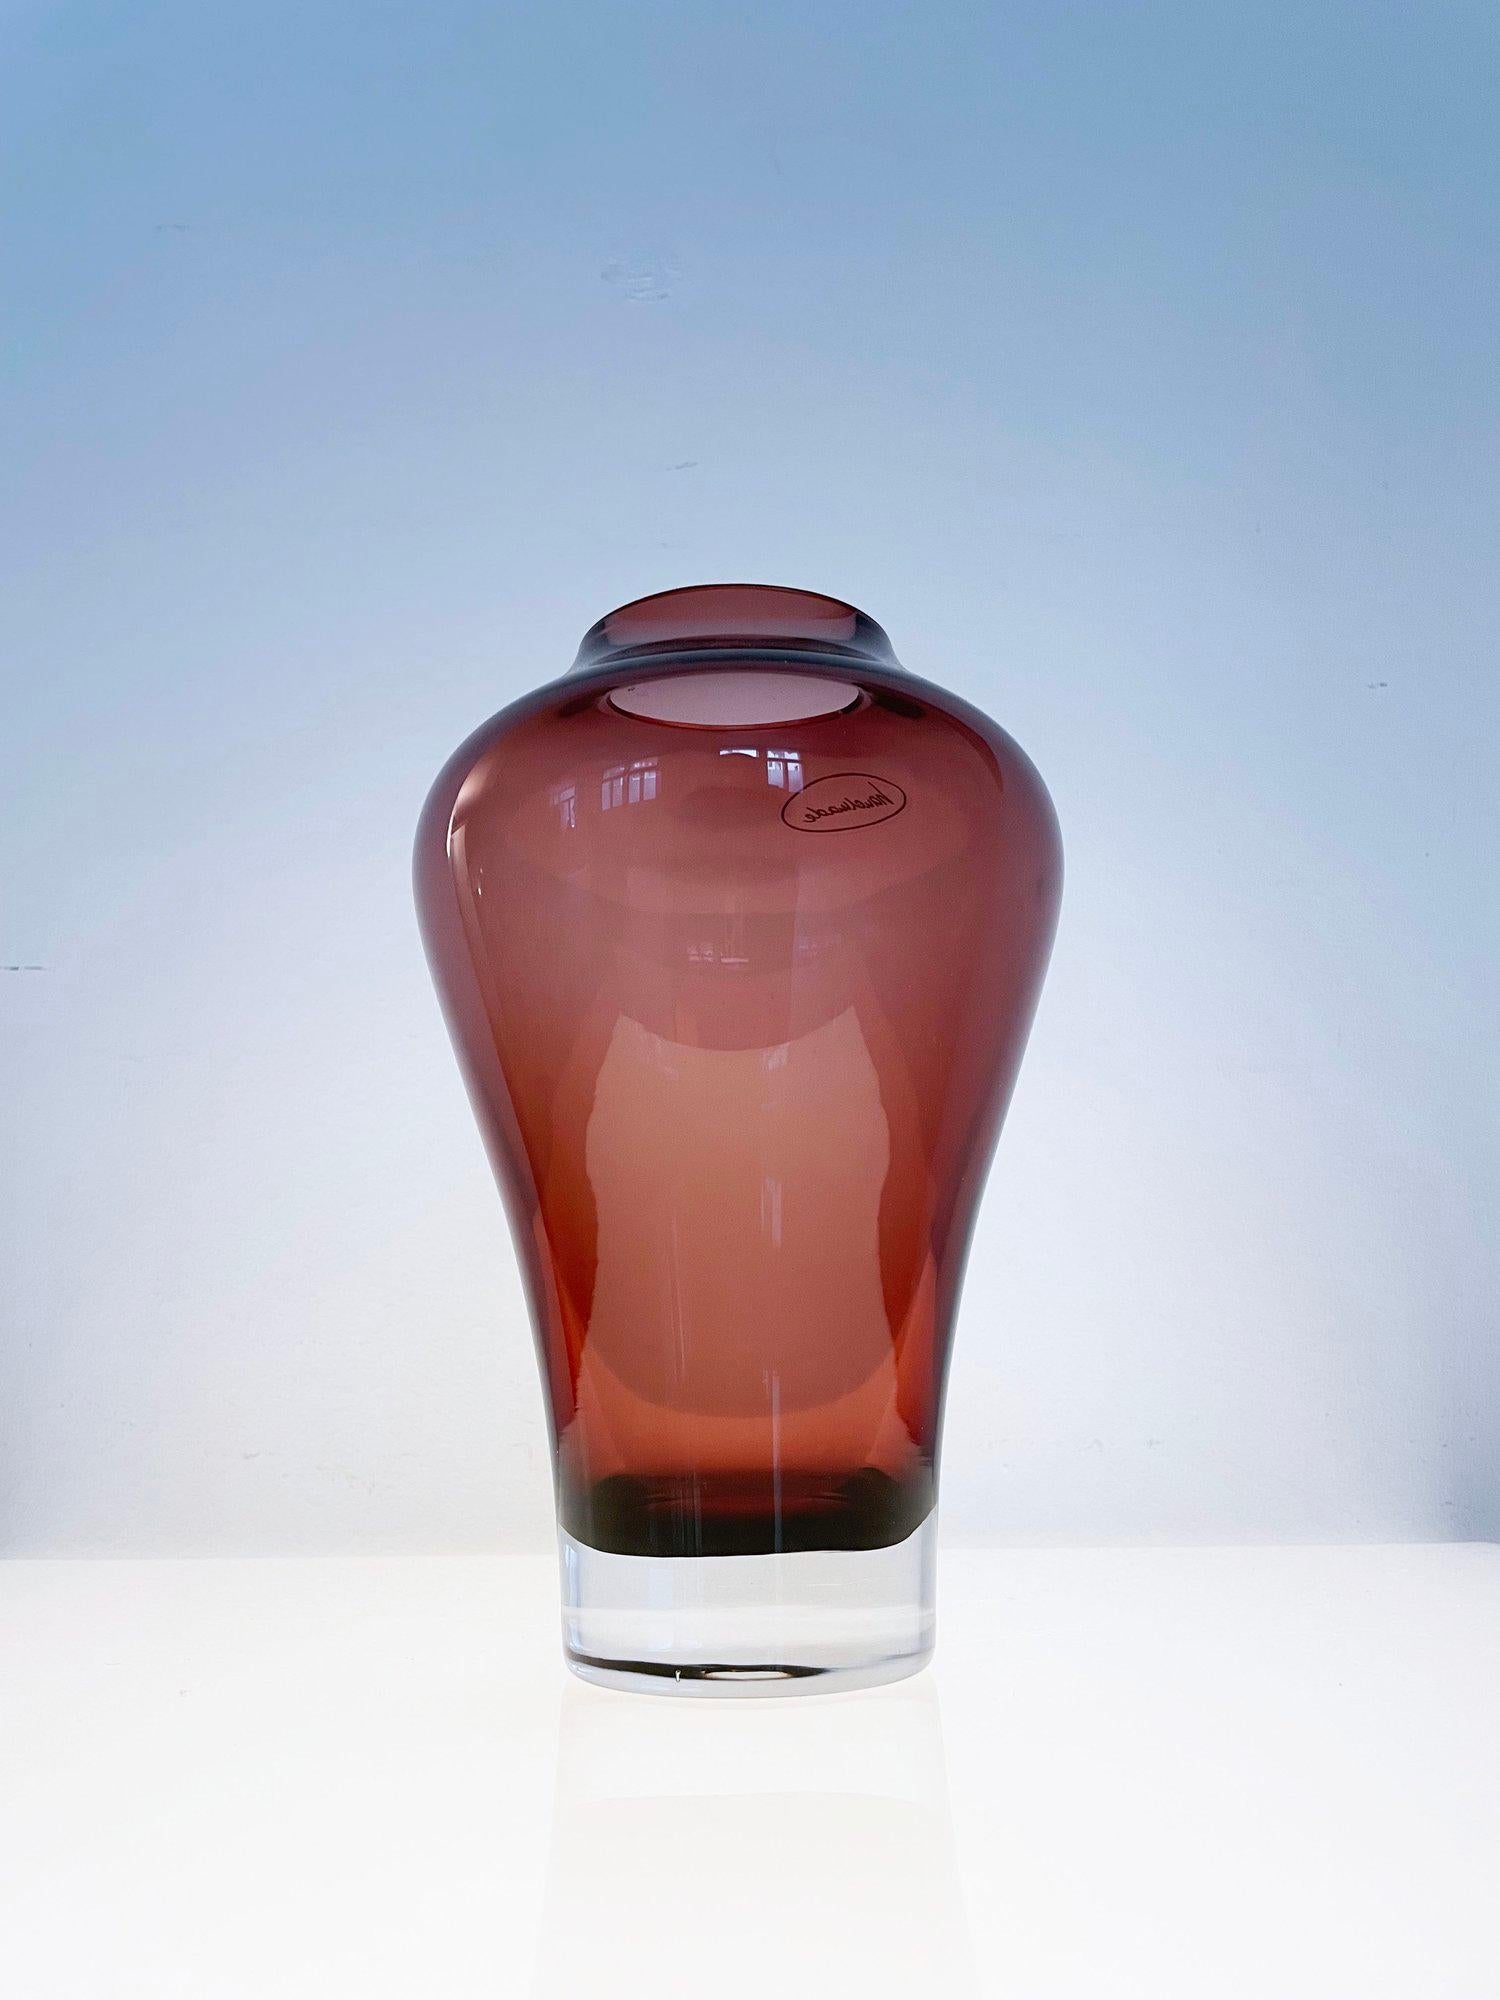 Handmade Villeroy & Boch pear shaped glass vase. Makers mark inscribed on base. Wine coloured glass with an organic form. For use as a decorative or as a functional vessel for holding flowers or other decorative elements. 